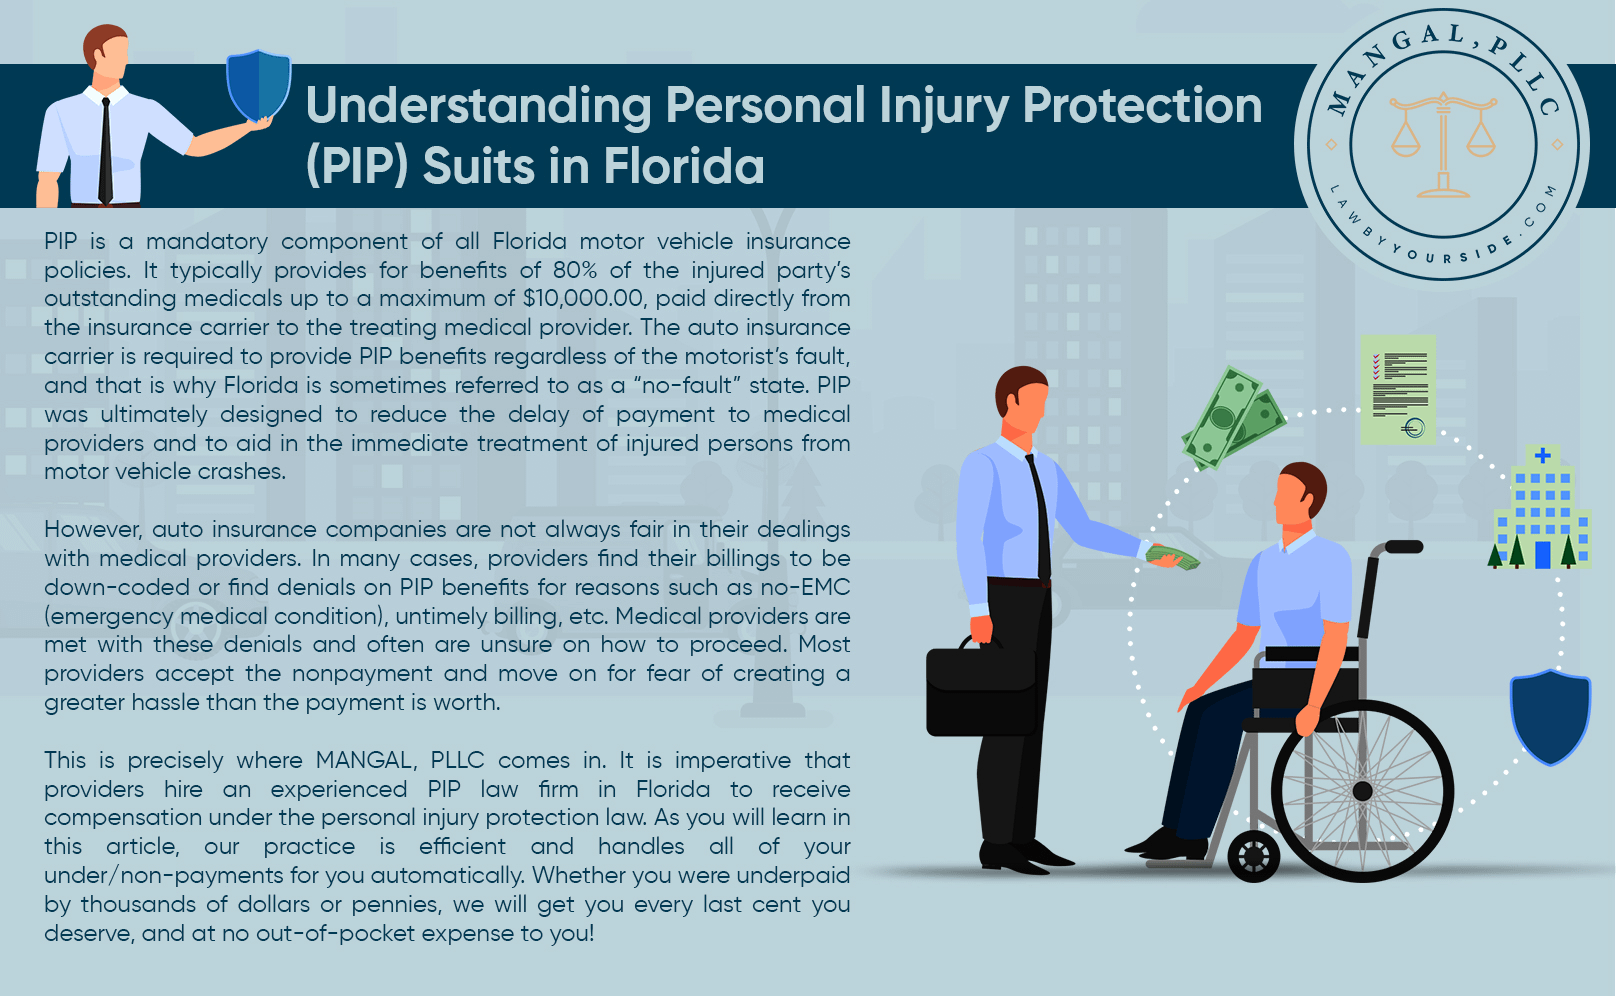 PIP-Lawsuits-for-Medical-Providers